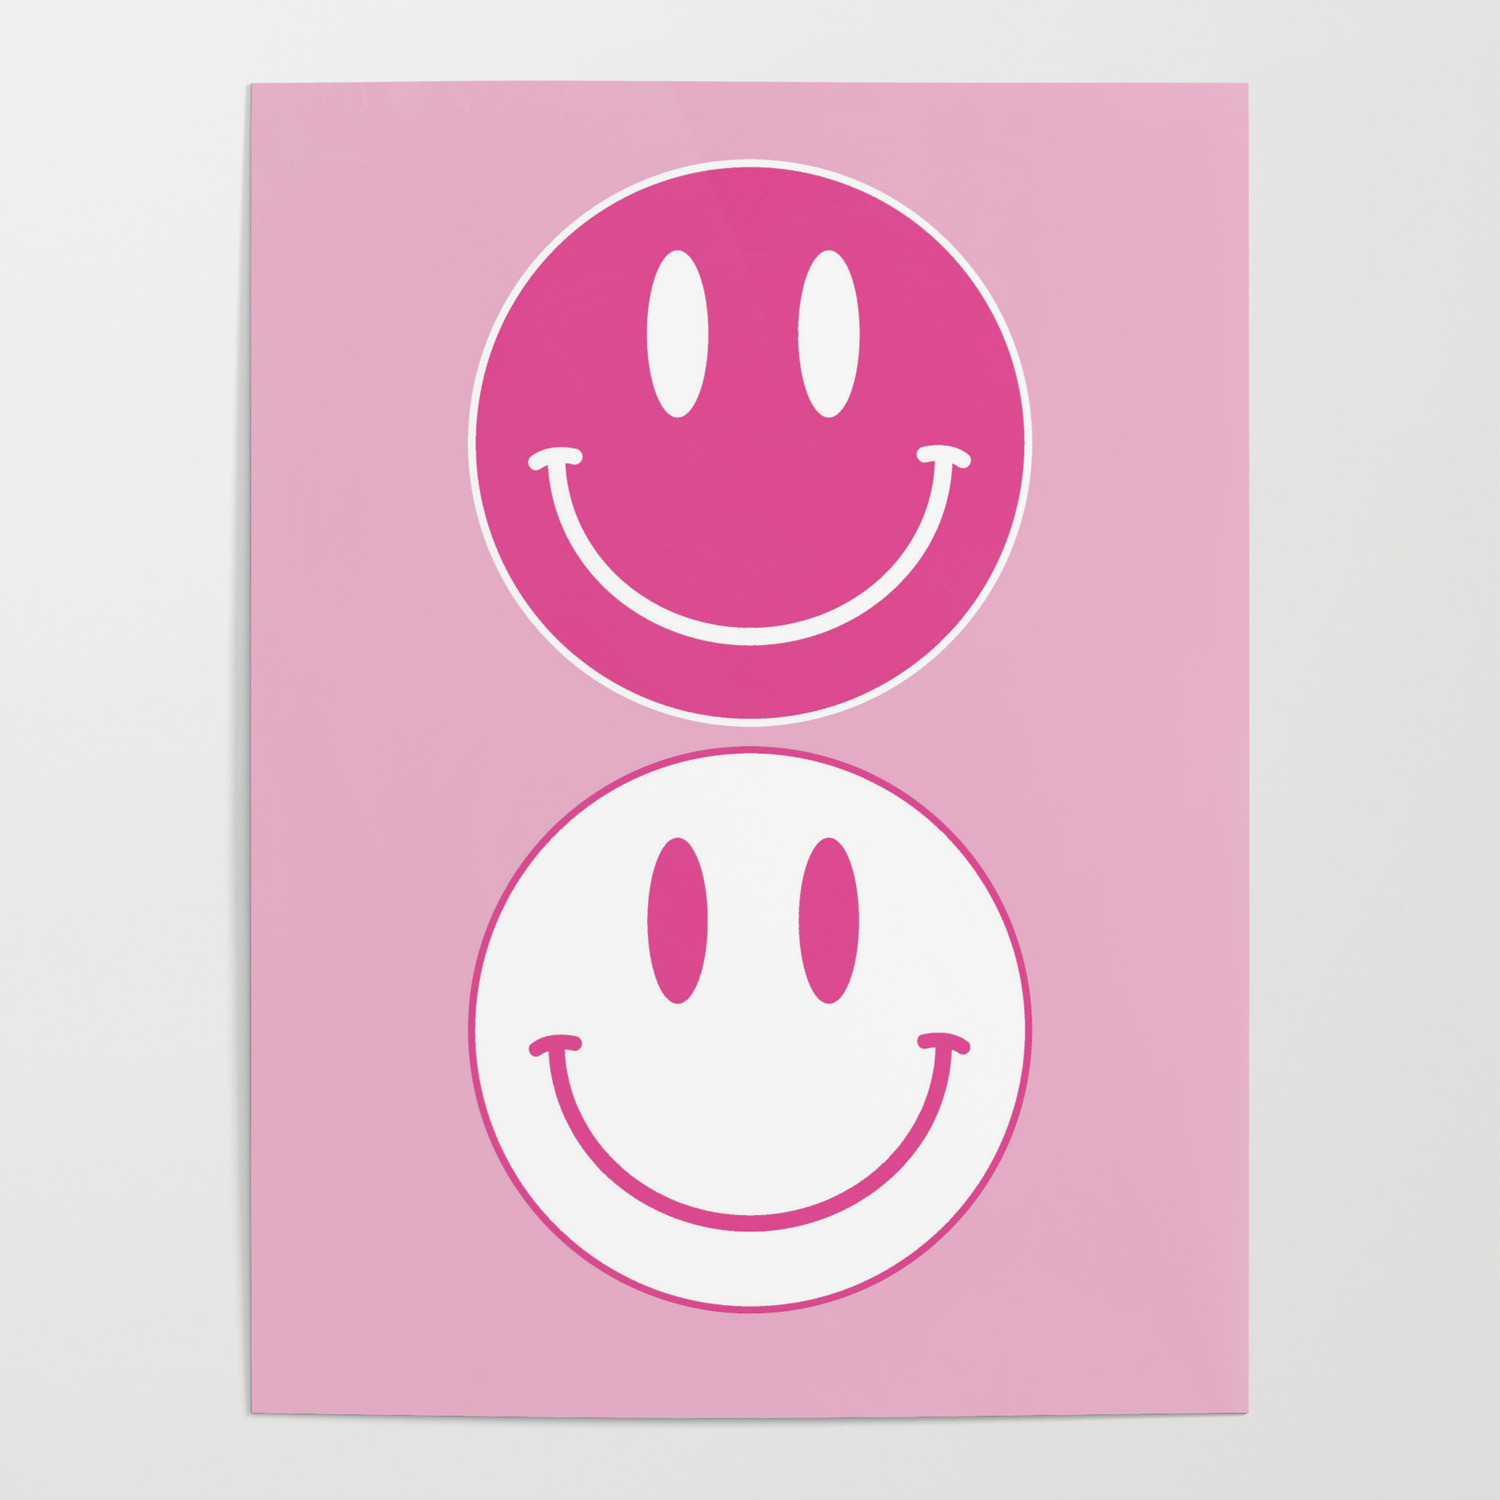 Large Pink and White Smiley Face Aesthetic Decor Poster